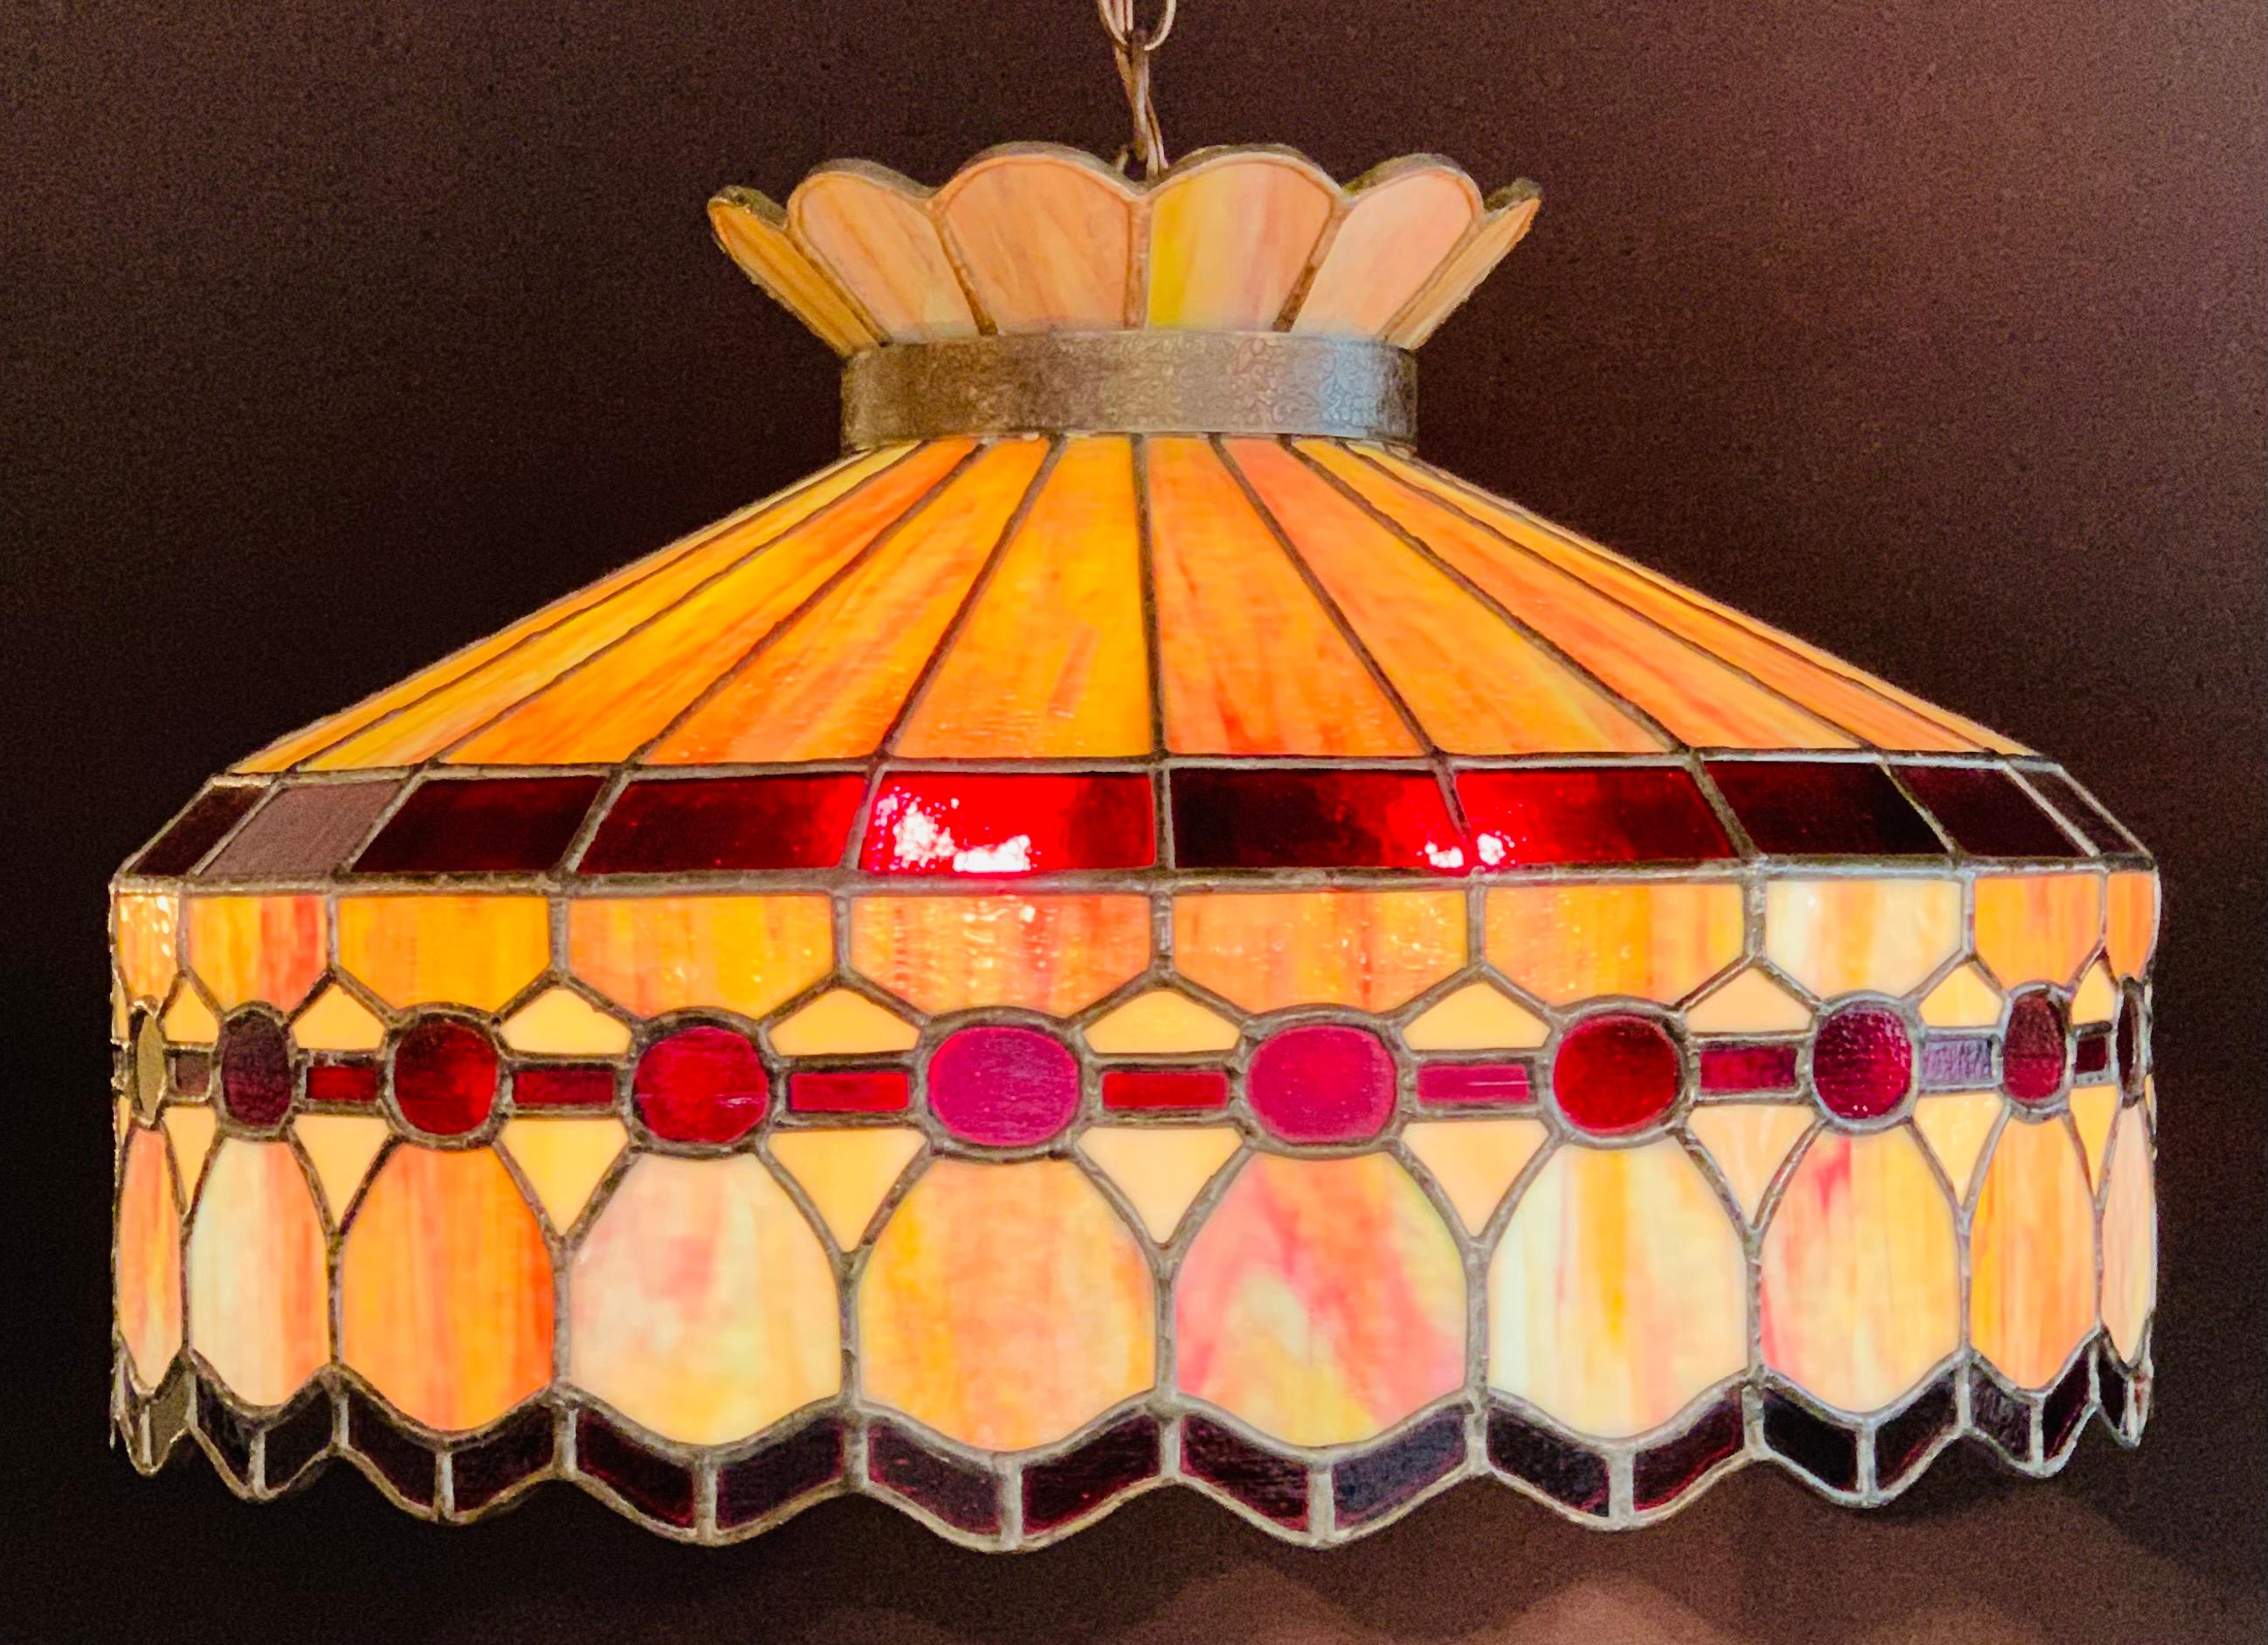 A stunning midcentury Tiffany Studios fashioned burgundy and off- white / light pink color fused glass pendant or chandelier with bronze inlay. The chandelier features a crown shaped top and a horizontal band leaded glass panel design. The hand